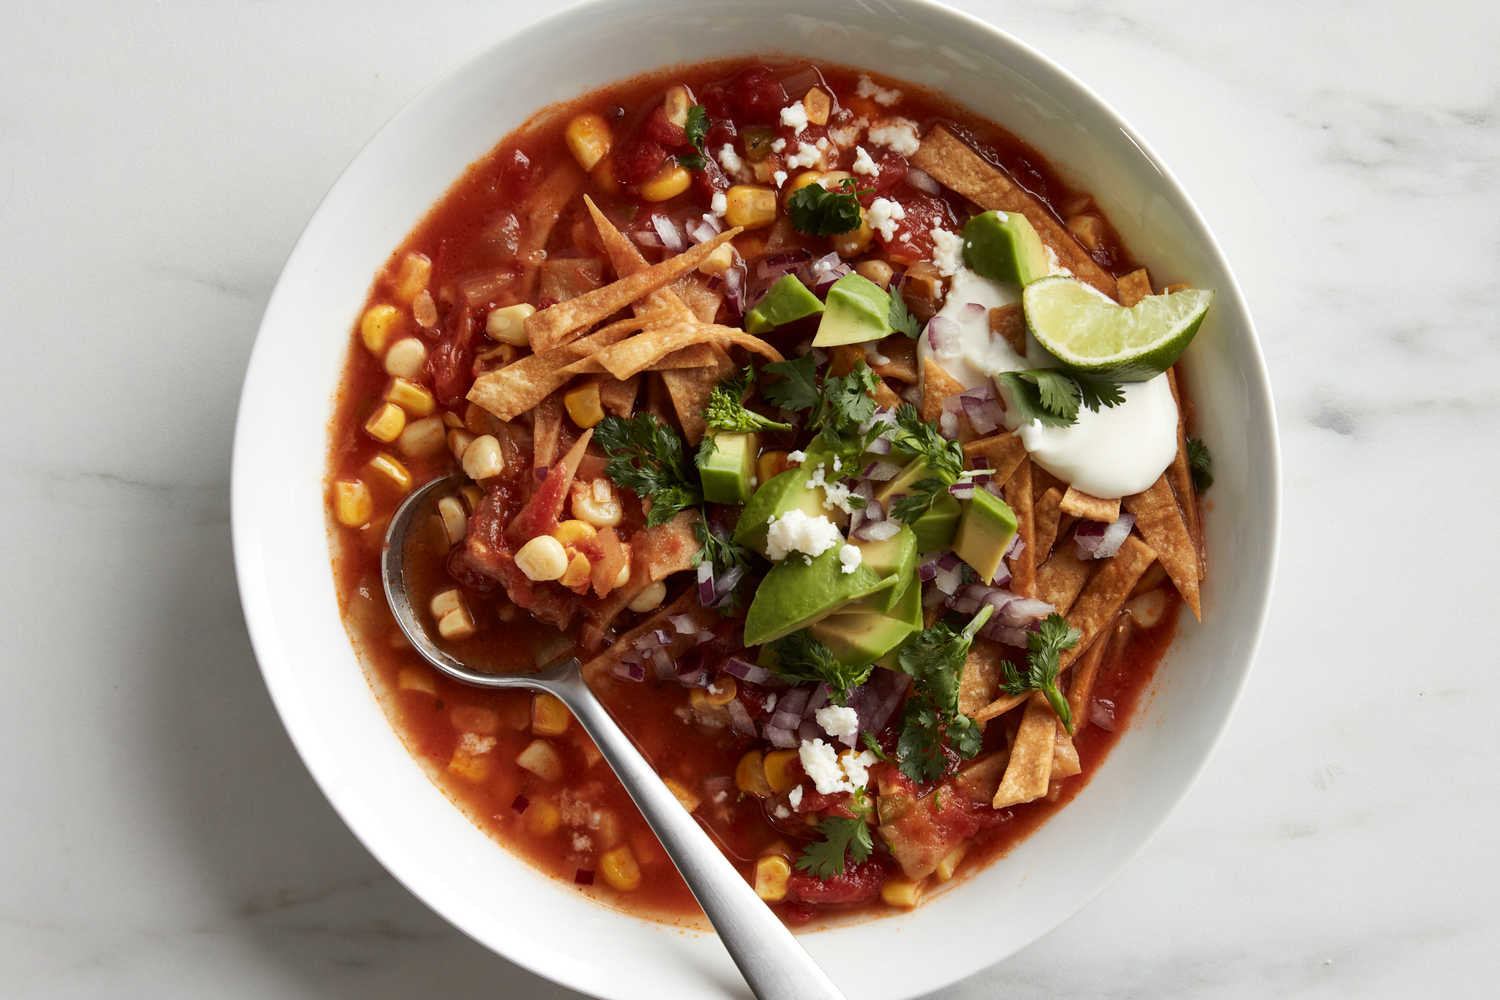 Nytimes Vegetarian Recipes
 Ve arian Tortilla Soup Recipe NYT Cooking